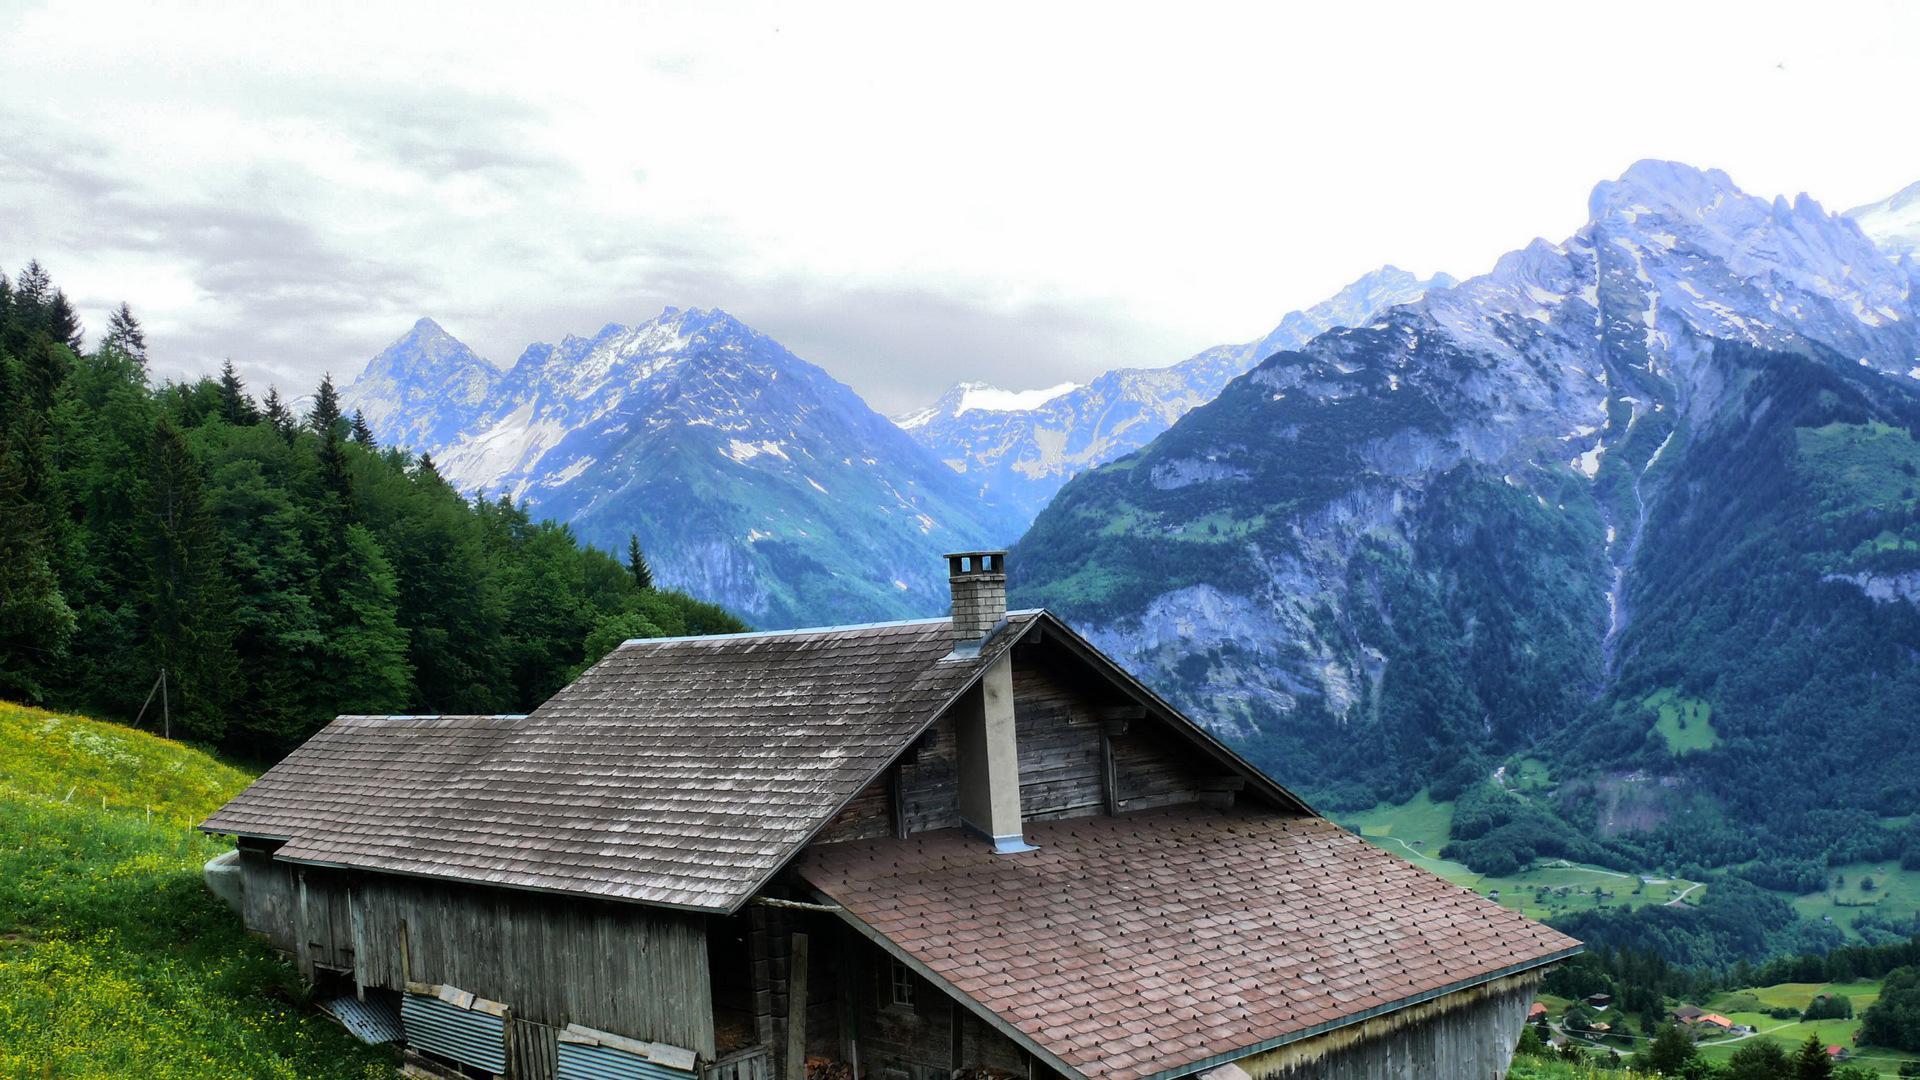 Wooden cabin in hasliberg on the swiss alps - (#162326) - High ...